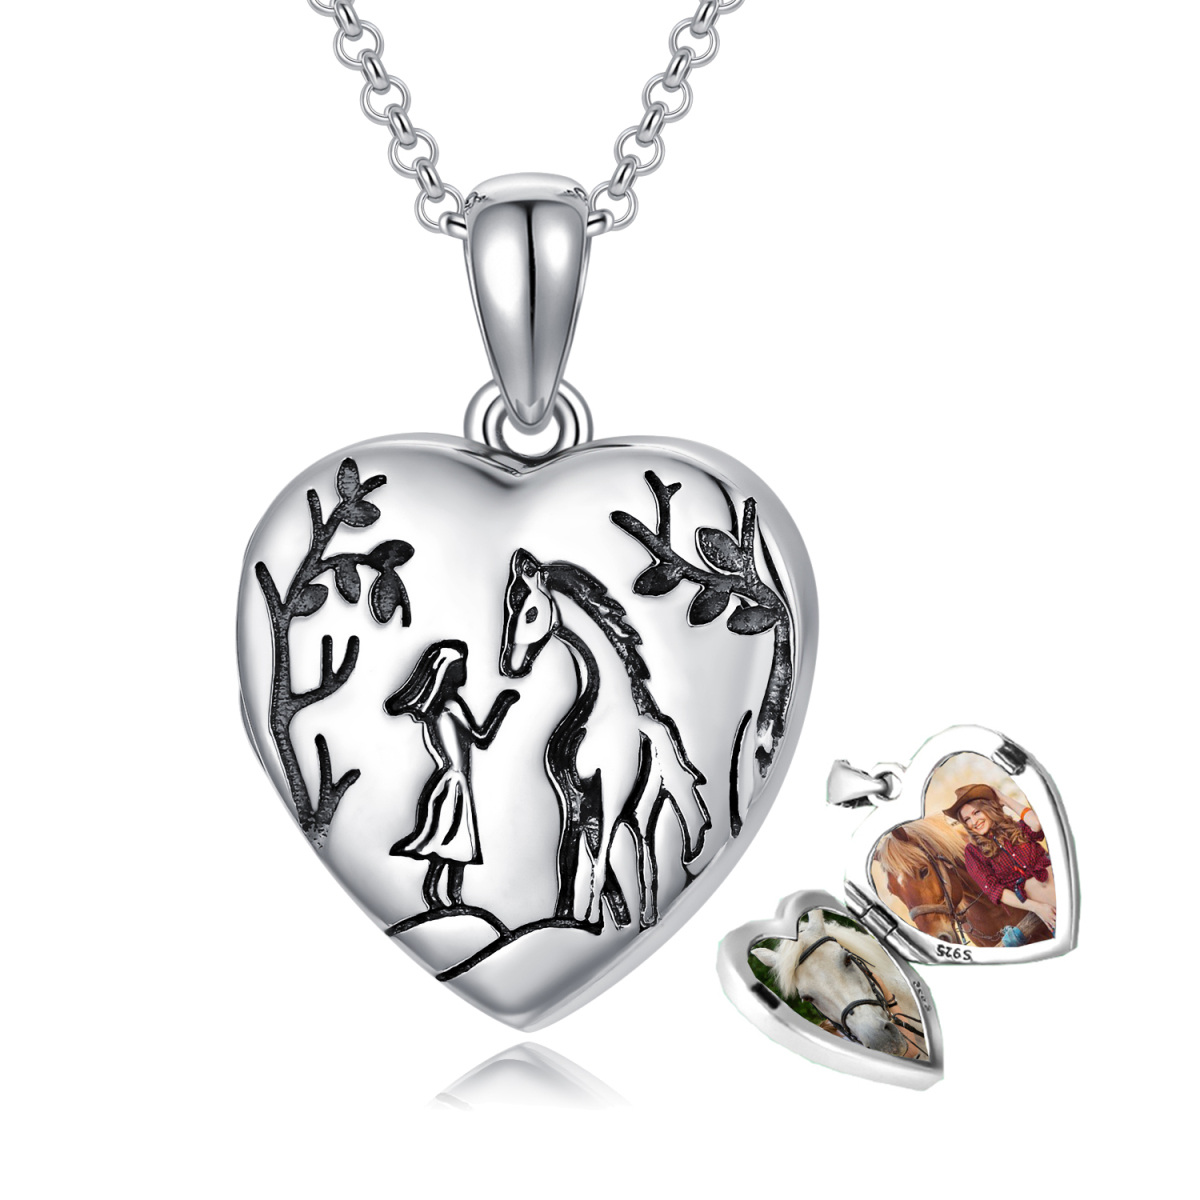 925 Sterling Silver Personalized Heart And Horse Photo Locket Necklace Photo Pendant-1